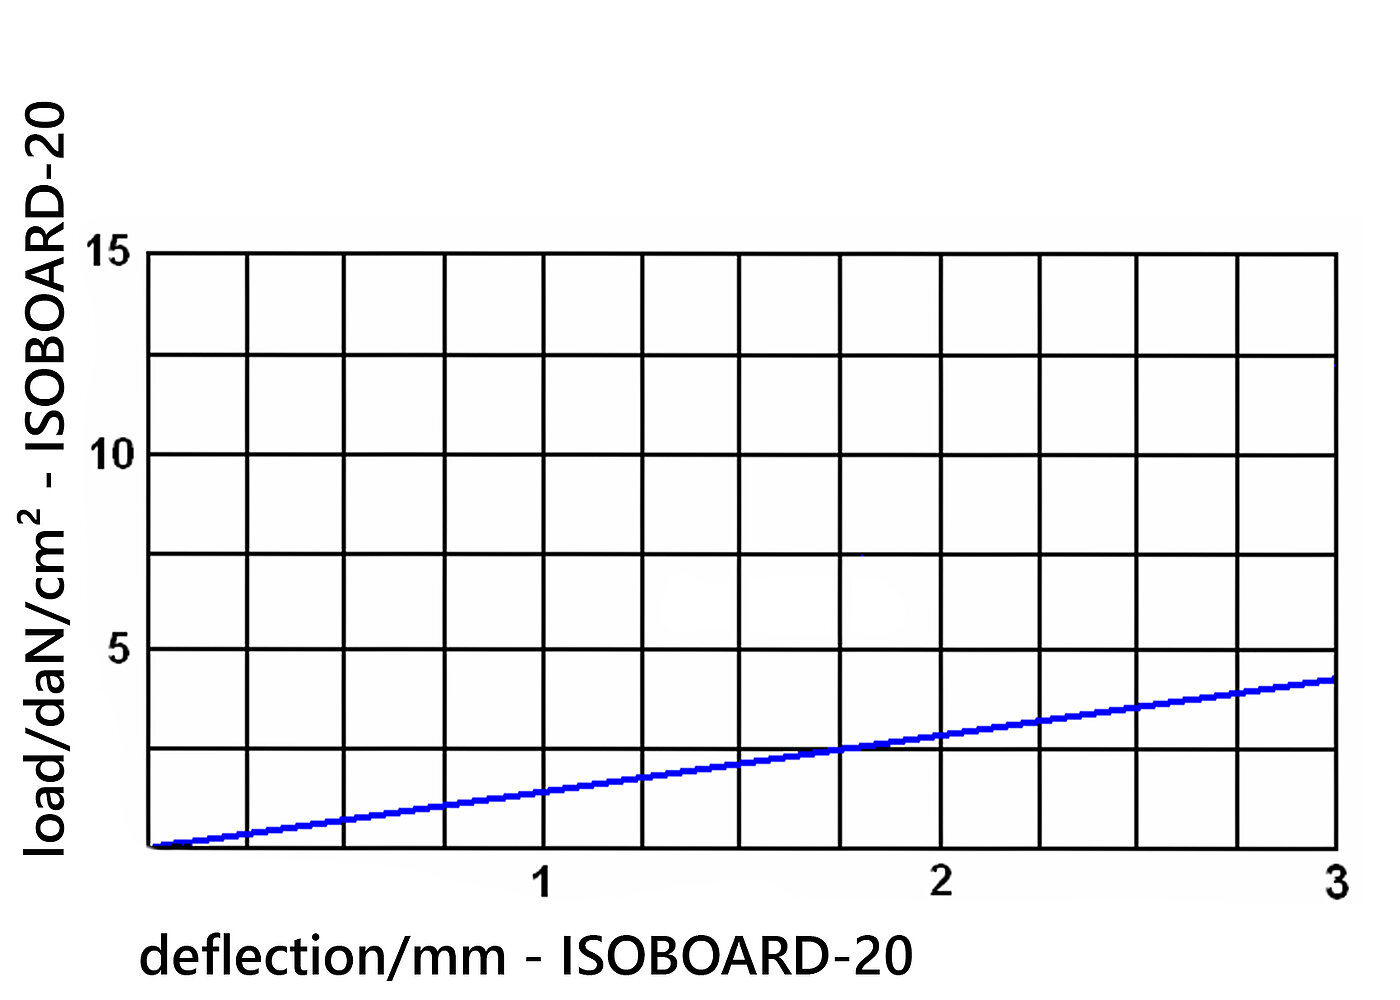 diagramme of the deflection of the elastomer board ISOBOARD-20 under load 